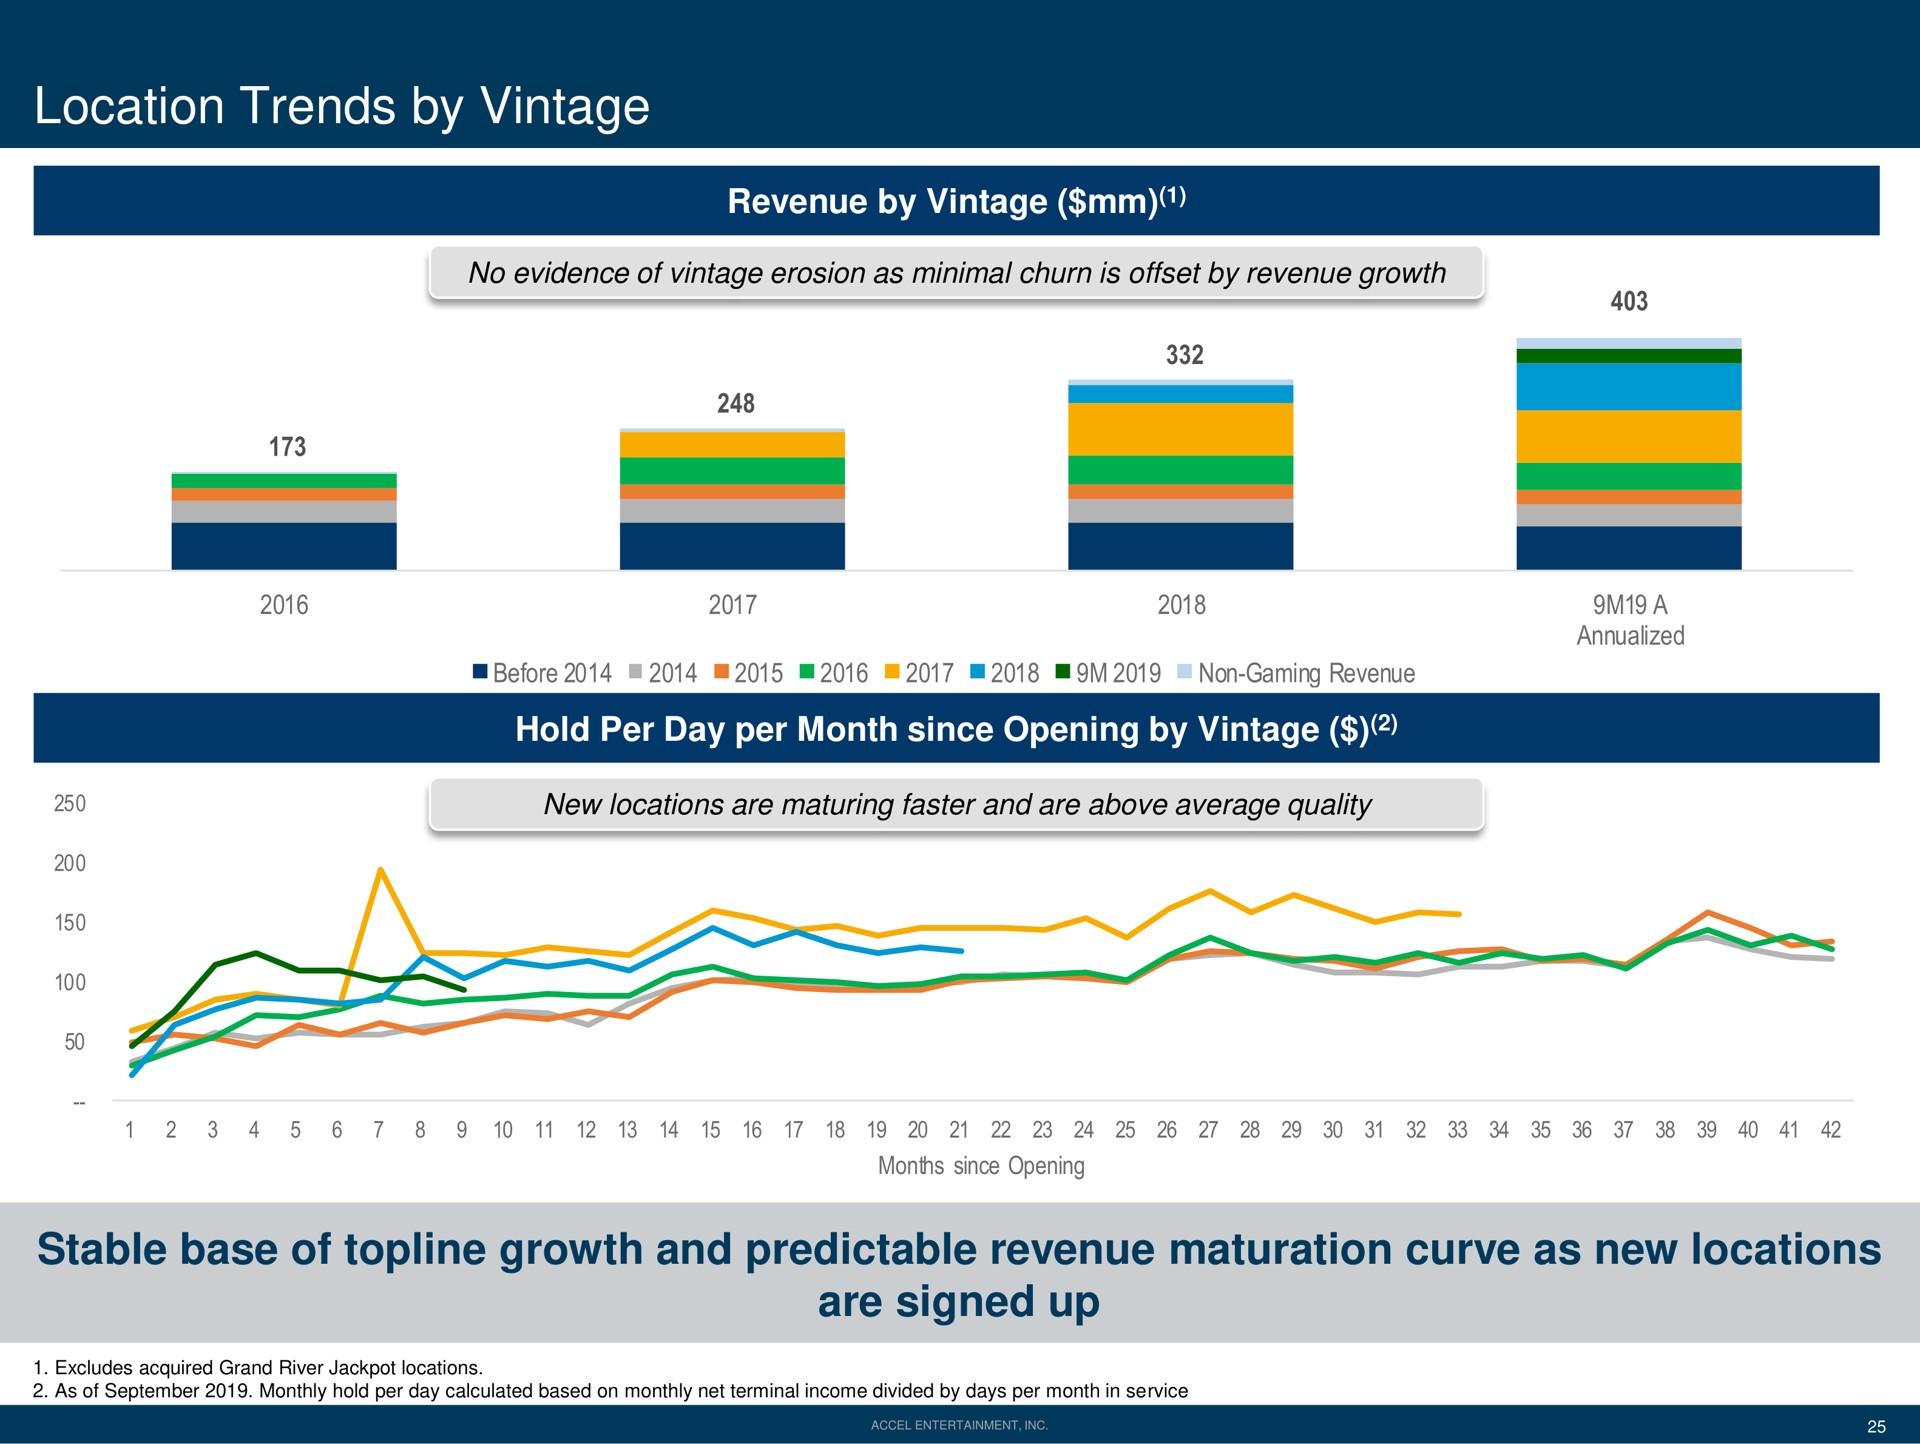 location trends by vintage stable base of topline growth and predictable revenue maturation curve as new locations are signed up | Accel Entertaiment